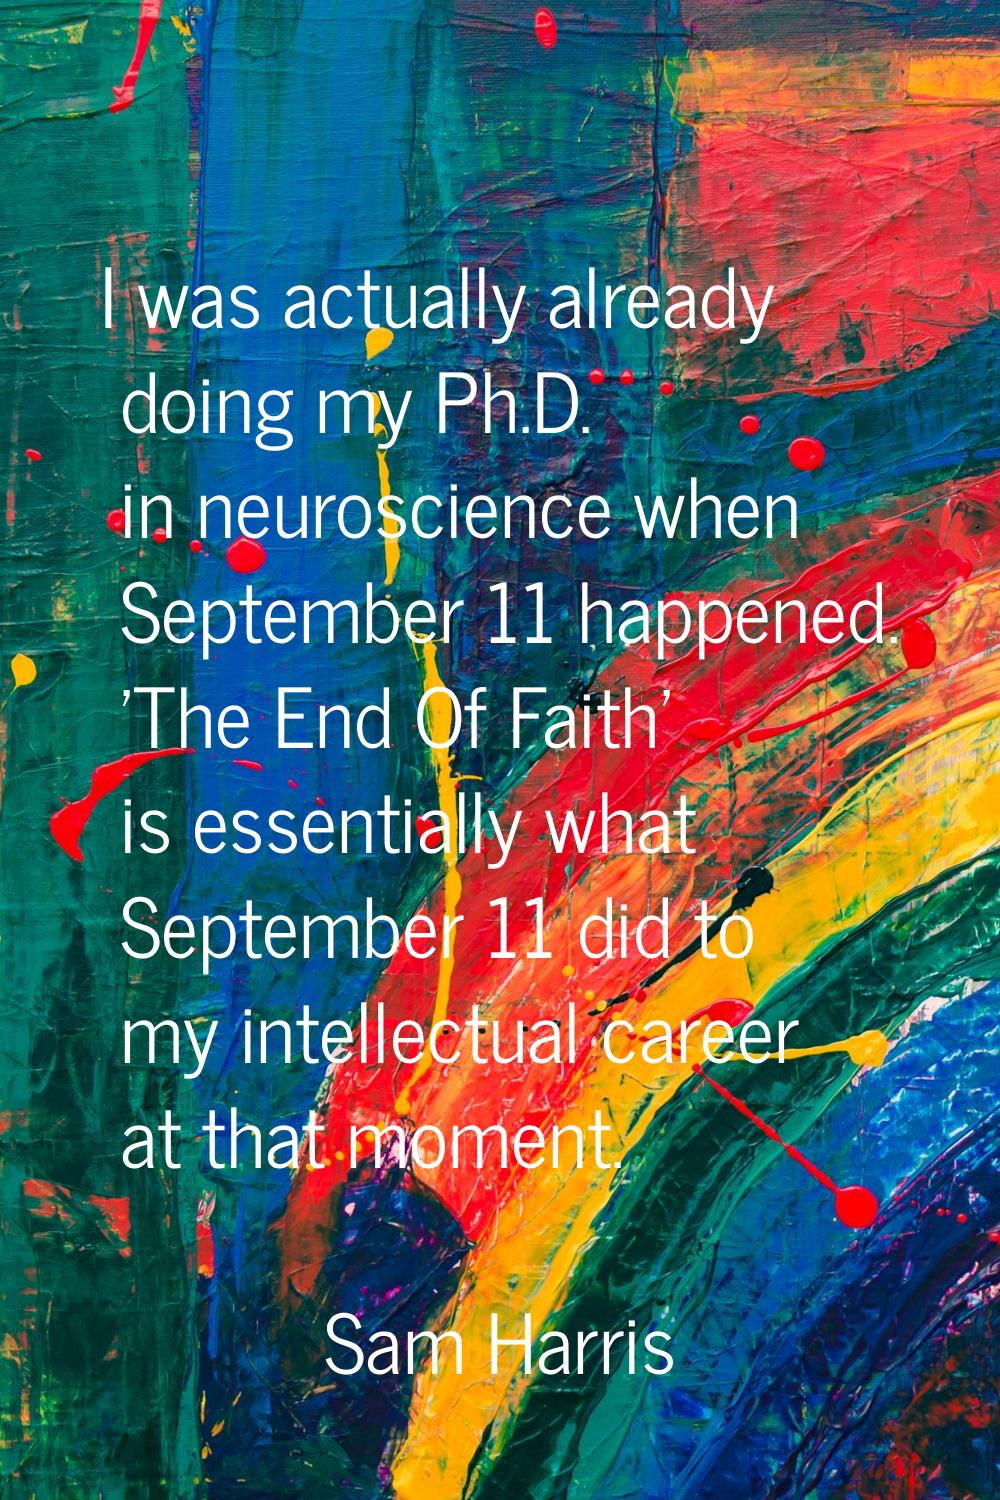 I was actually already doing my Ph.D. in neuroscience when September 11 happened. 'The End Of Faith